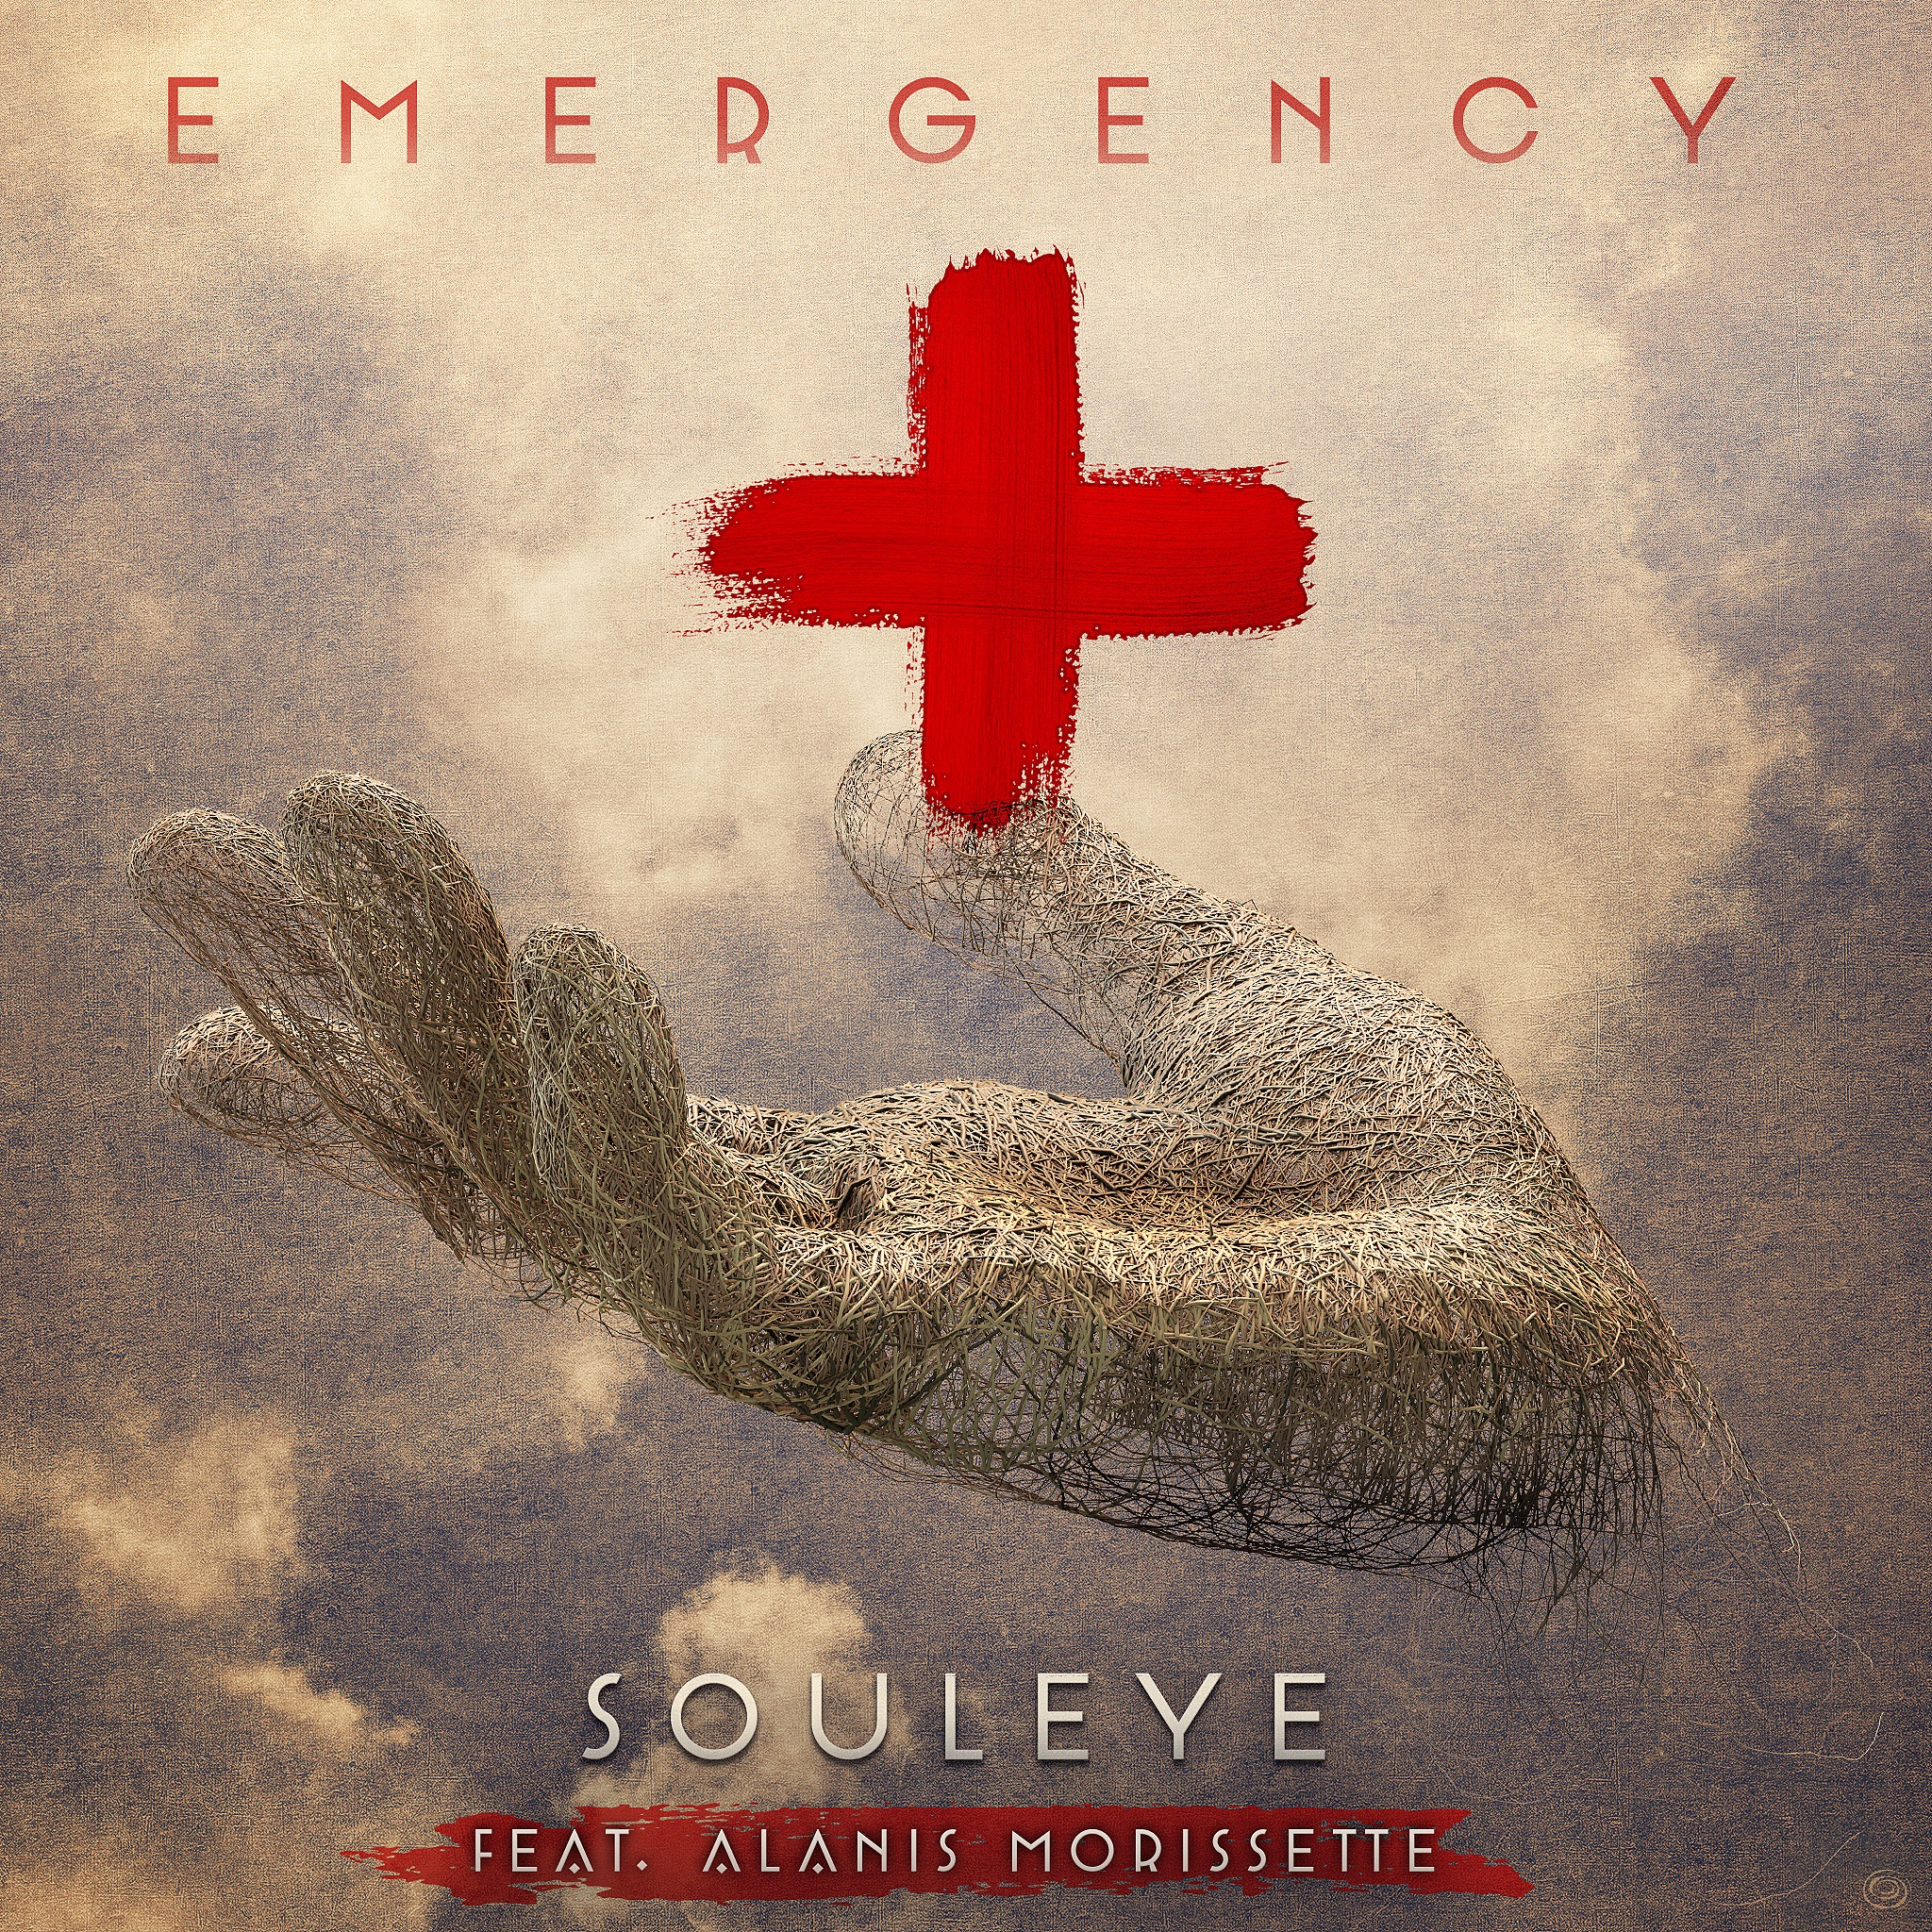 “Emergency” Feat ‘Alanis Morissette’ is the lead single off Souleye’s upcoming highly-anticipated full-length album ‘Disguised As Tomorrow’.